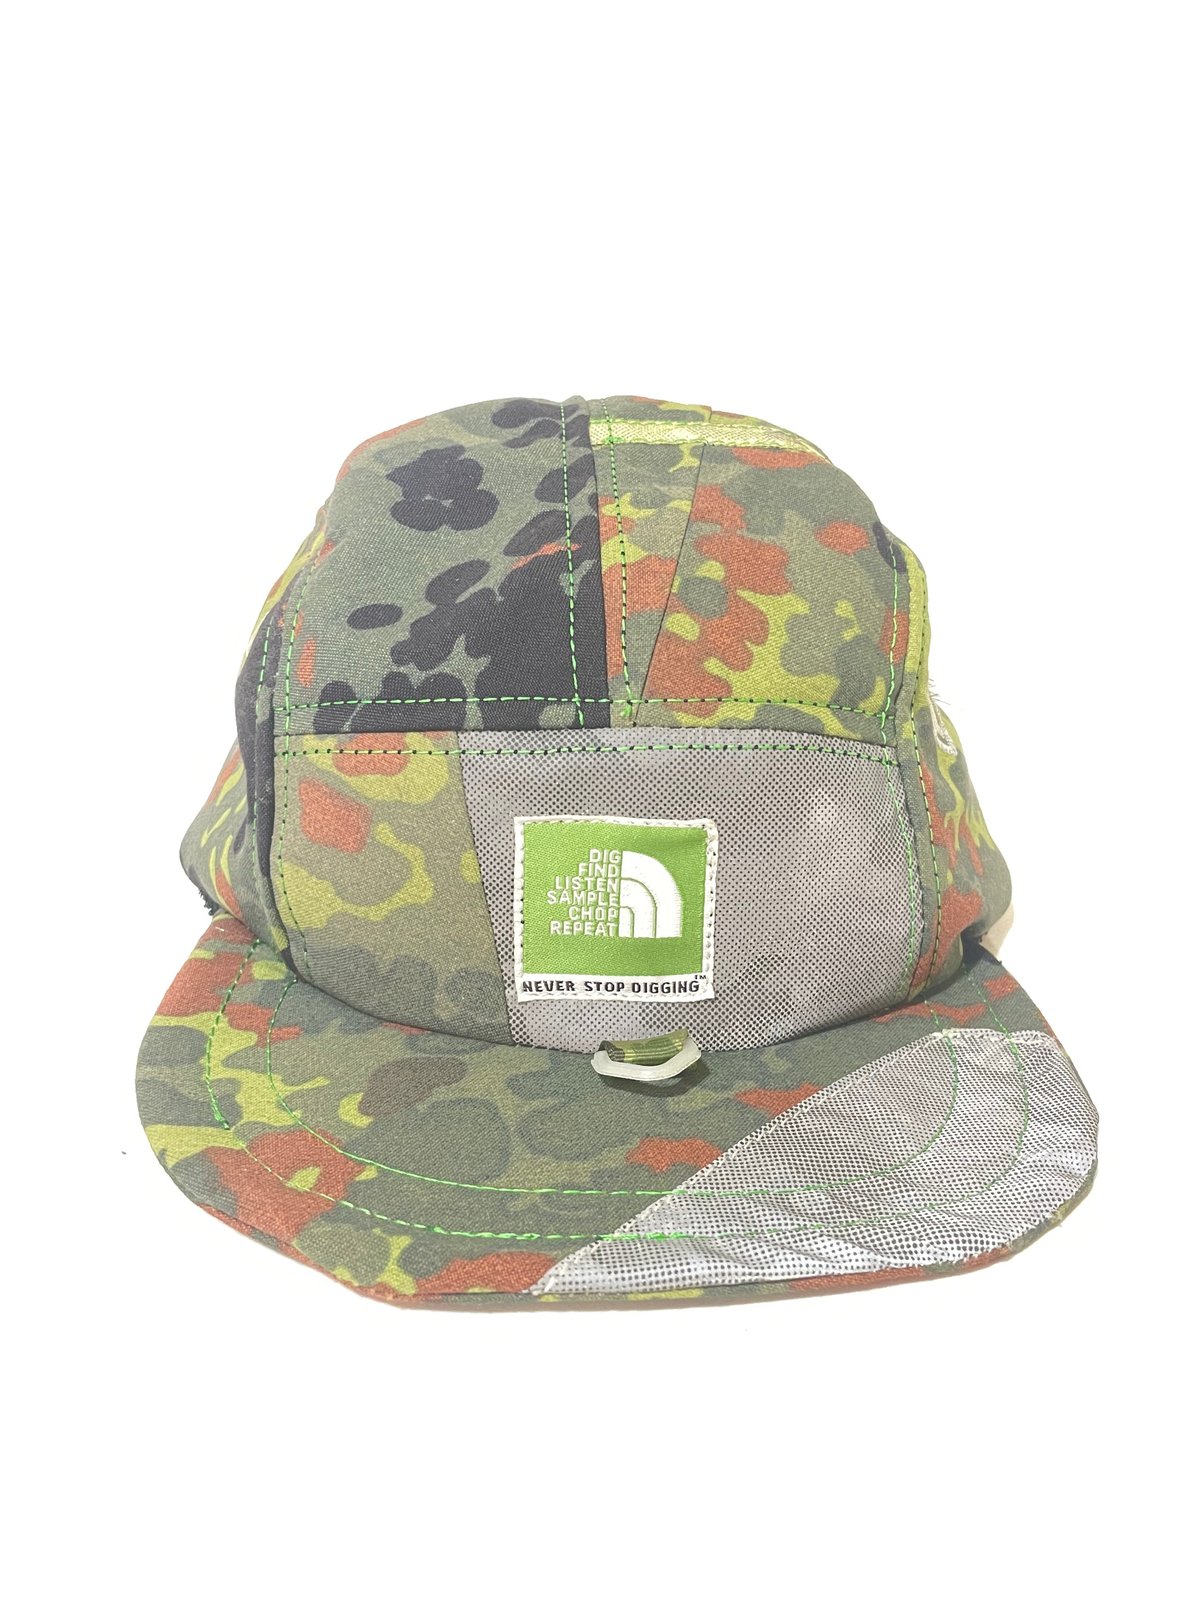 DigFind X Flavorseal Camo Reflective Recycled Goretex 5-Panel Hat